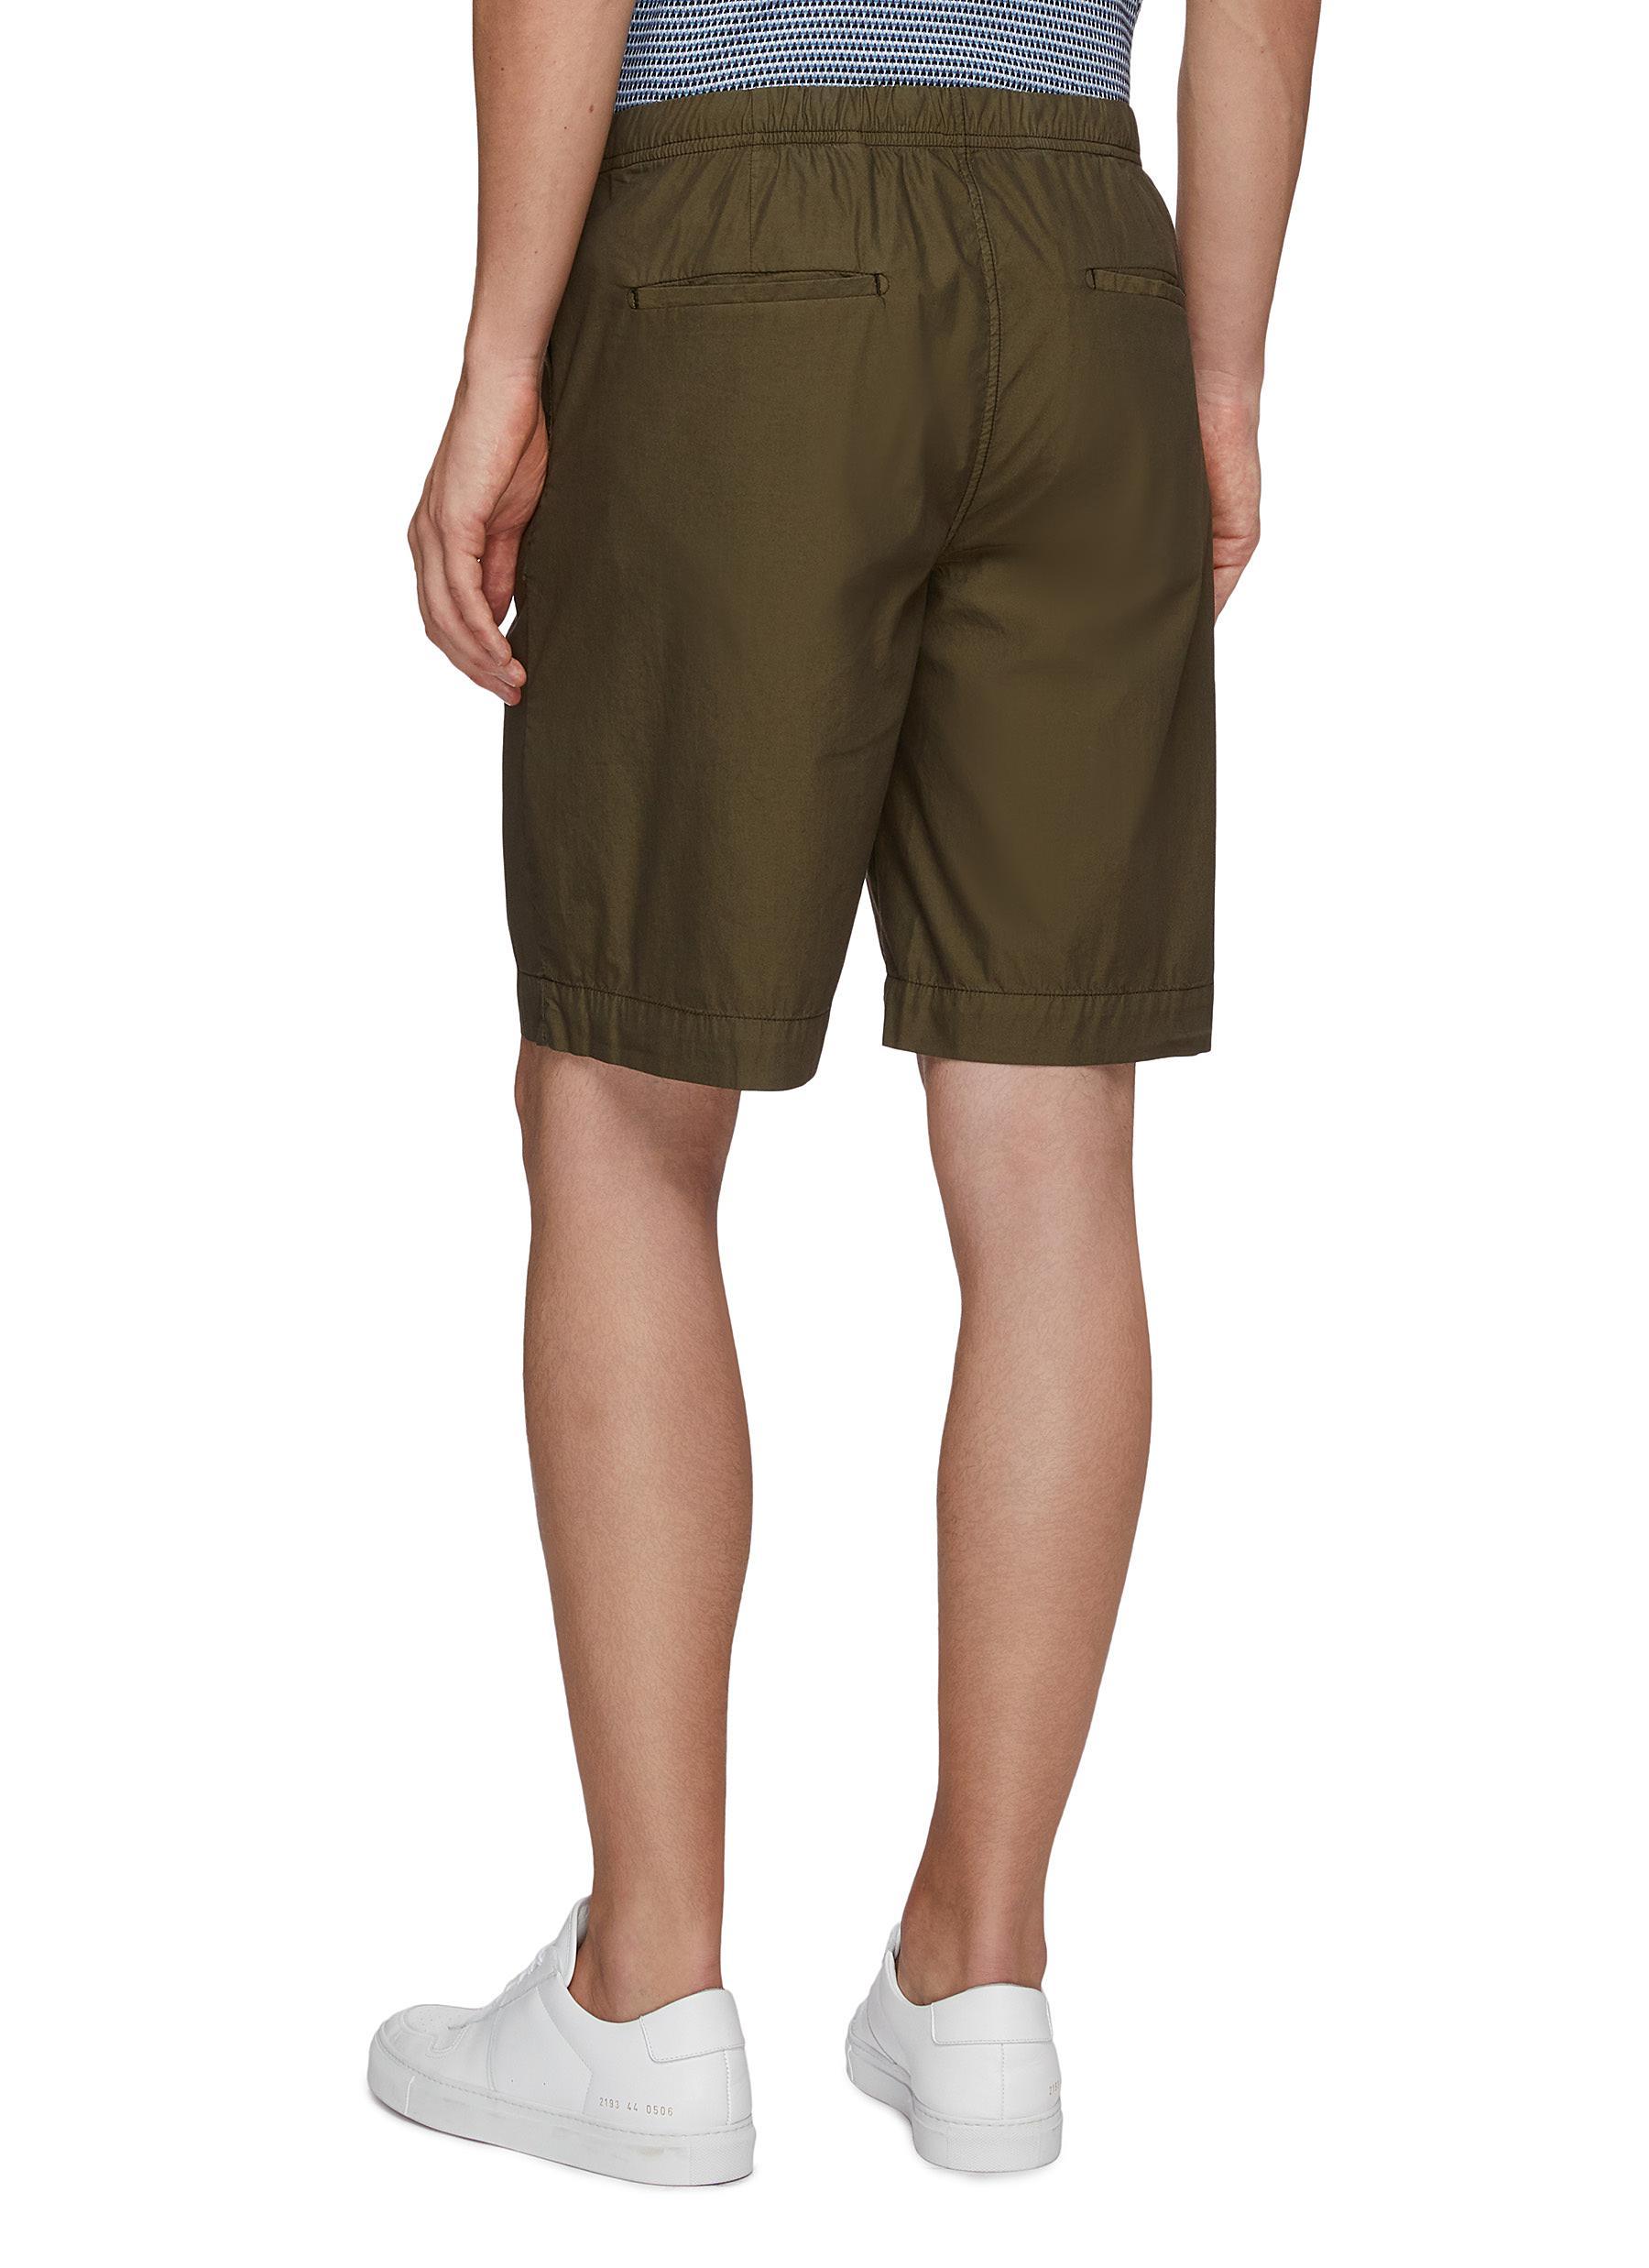 PS by Paul Smith Cotton Elastic Waistband Shorts in Green for Men - Lyst